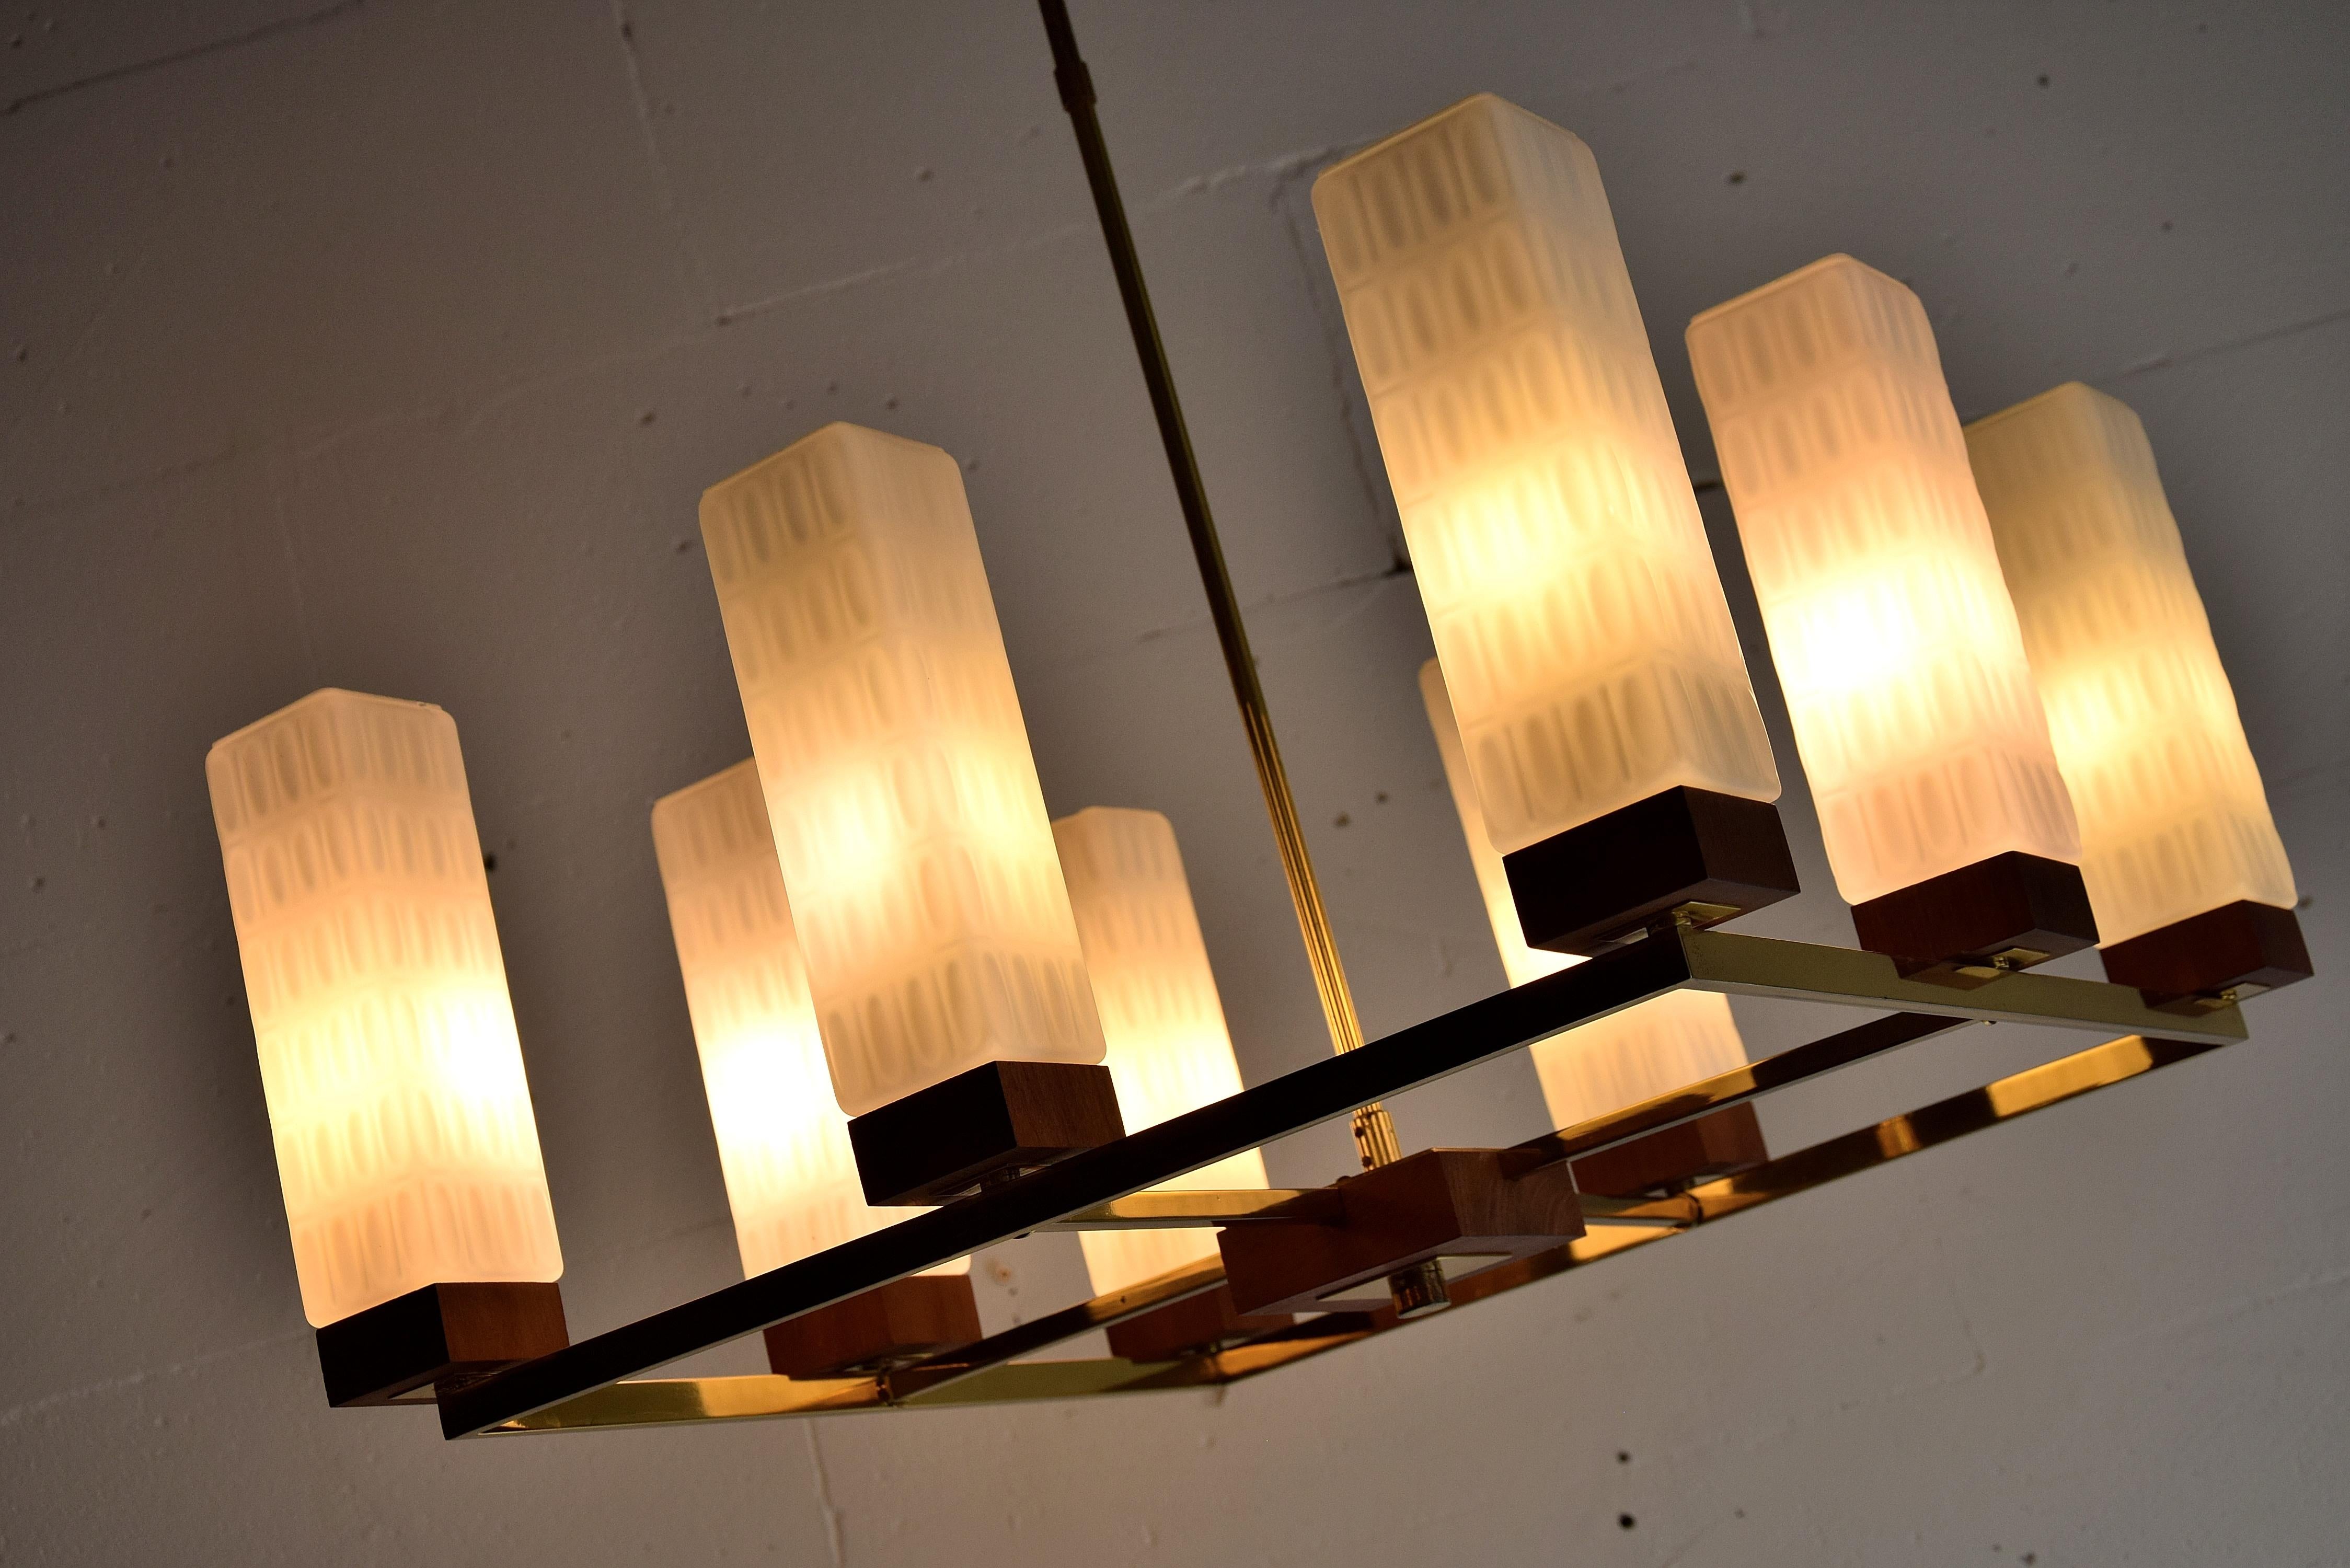 Sophisticated, elegant and stylish Mid-Century Modern brass, Teak and milk glass chandelier made by Primat Kaiser in the 1960s.
The chandelier is in fantastic condition and the chalises diffuse the light in a pleasant way. Two of the milk glass